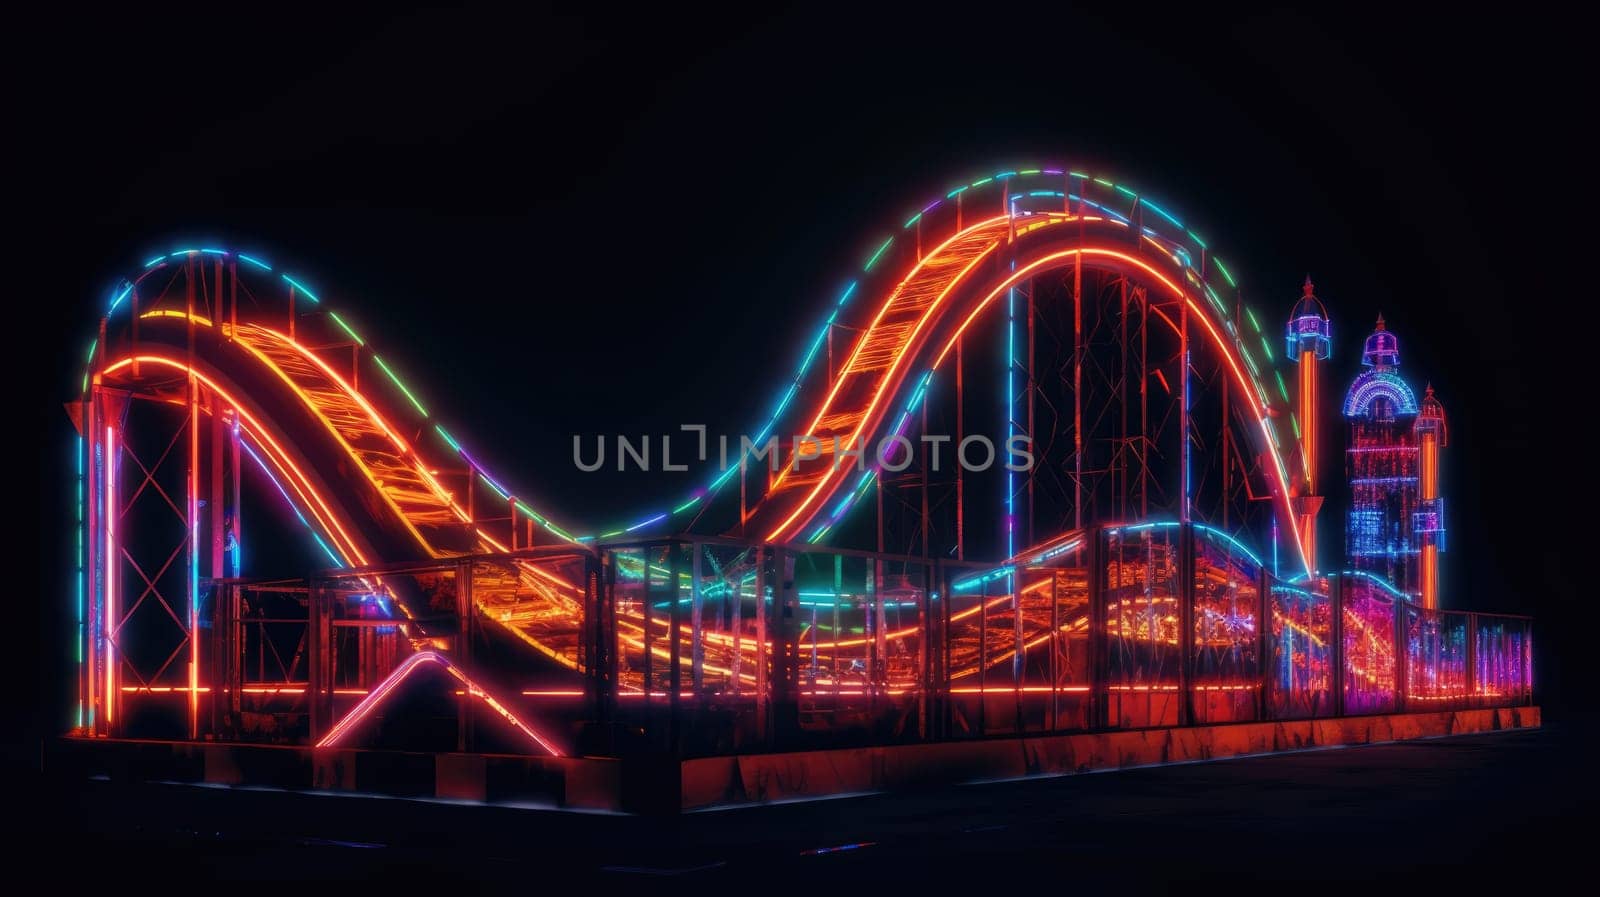 Amusement park with roller coaster at night with bright colorful neon lights by JuliaDorian